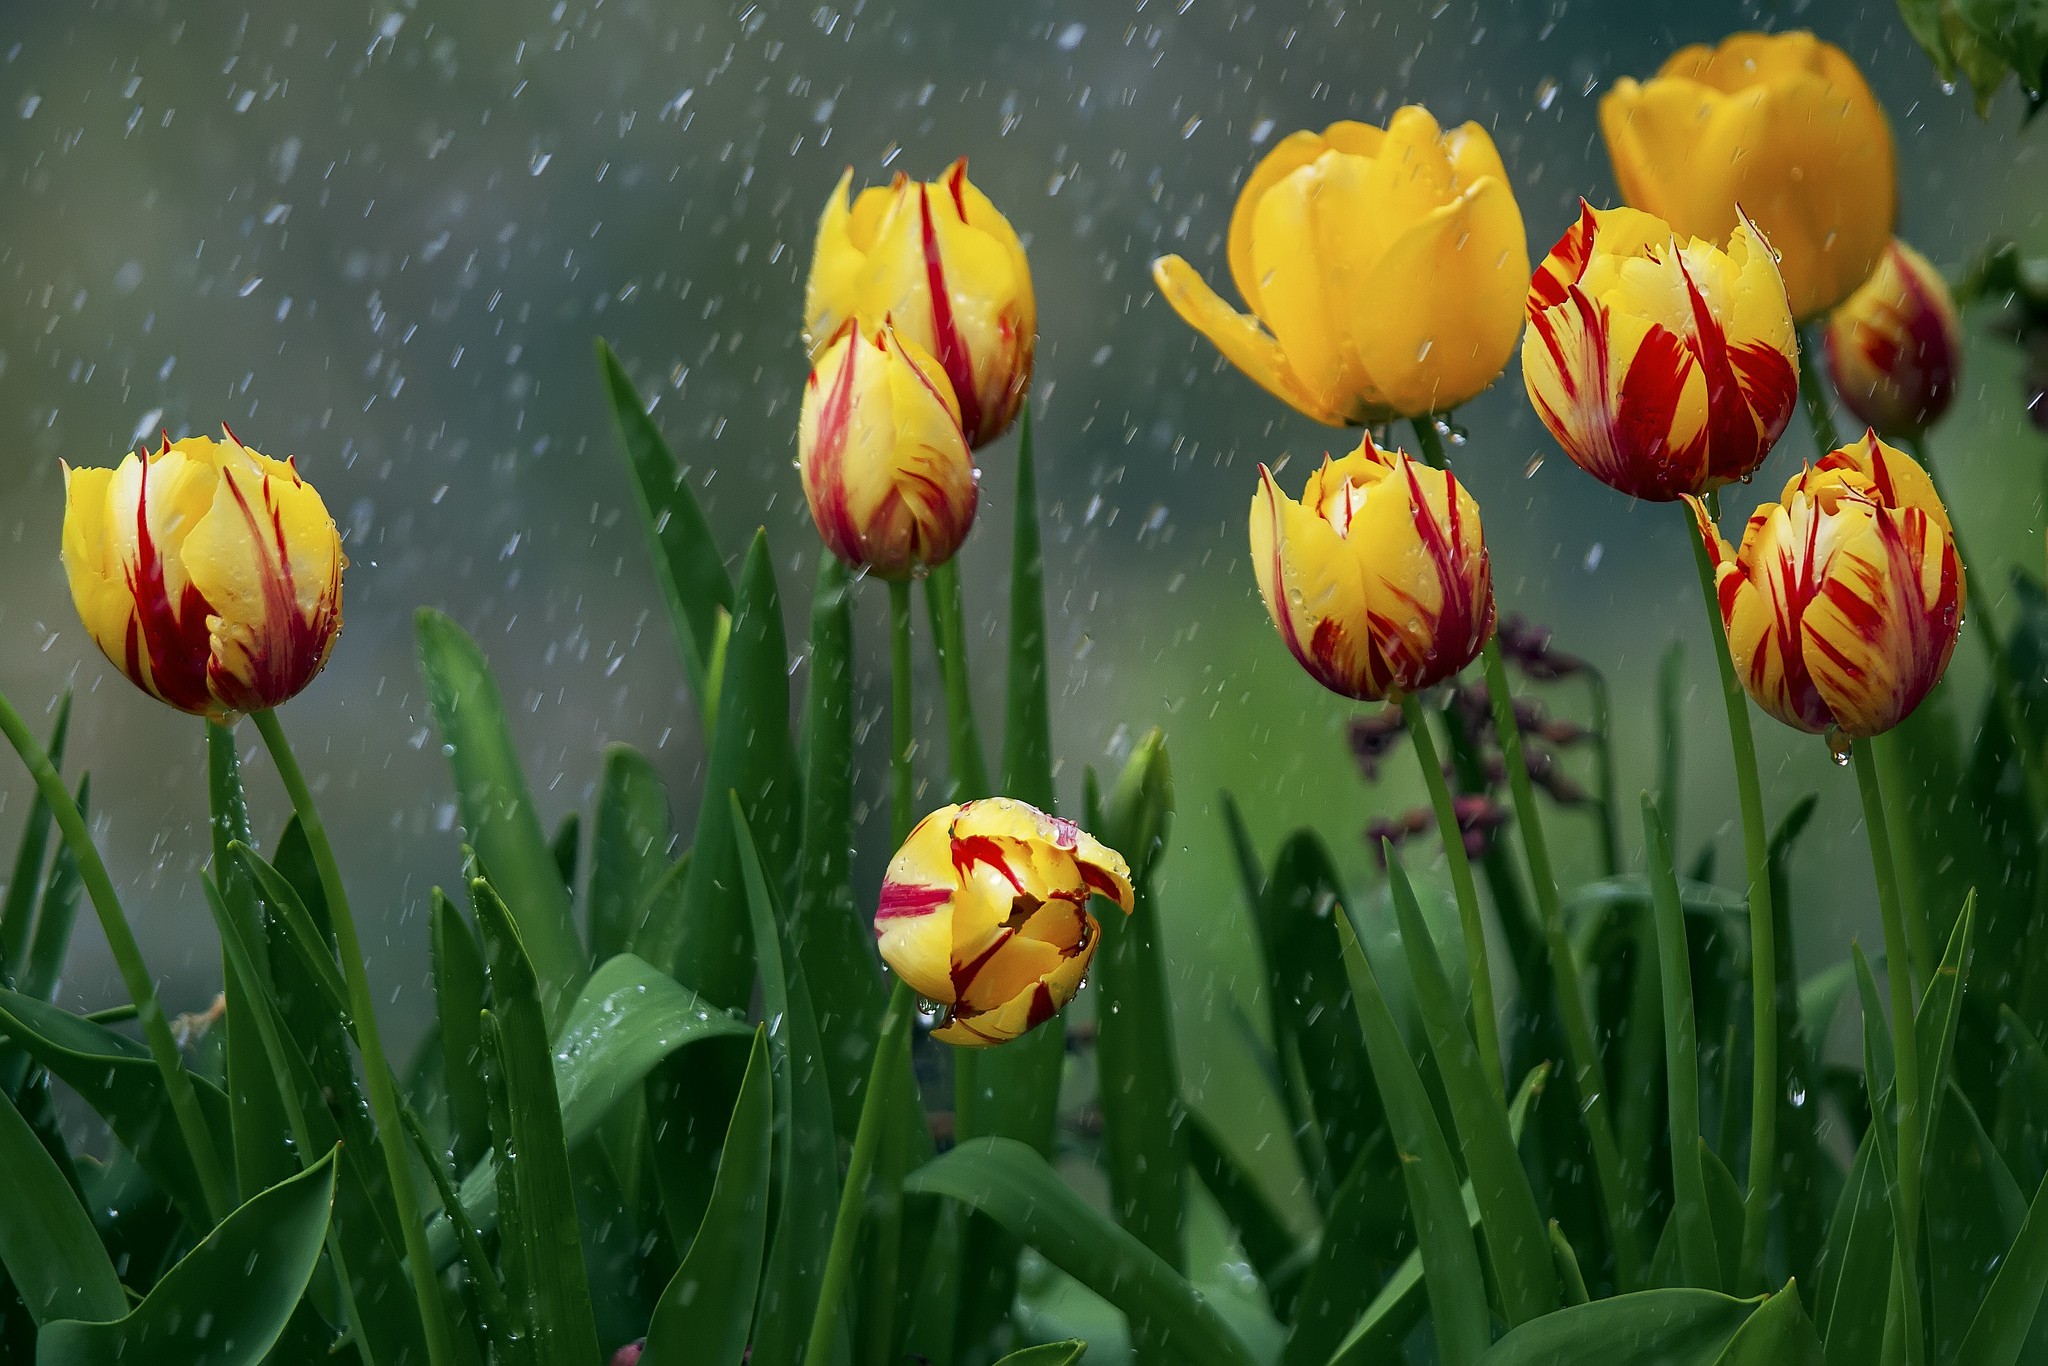 General 2048x1366 plants yellow flowers flowers outdoors tulips